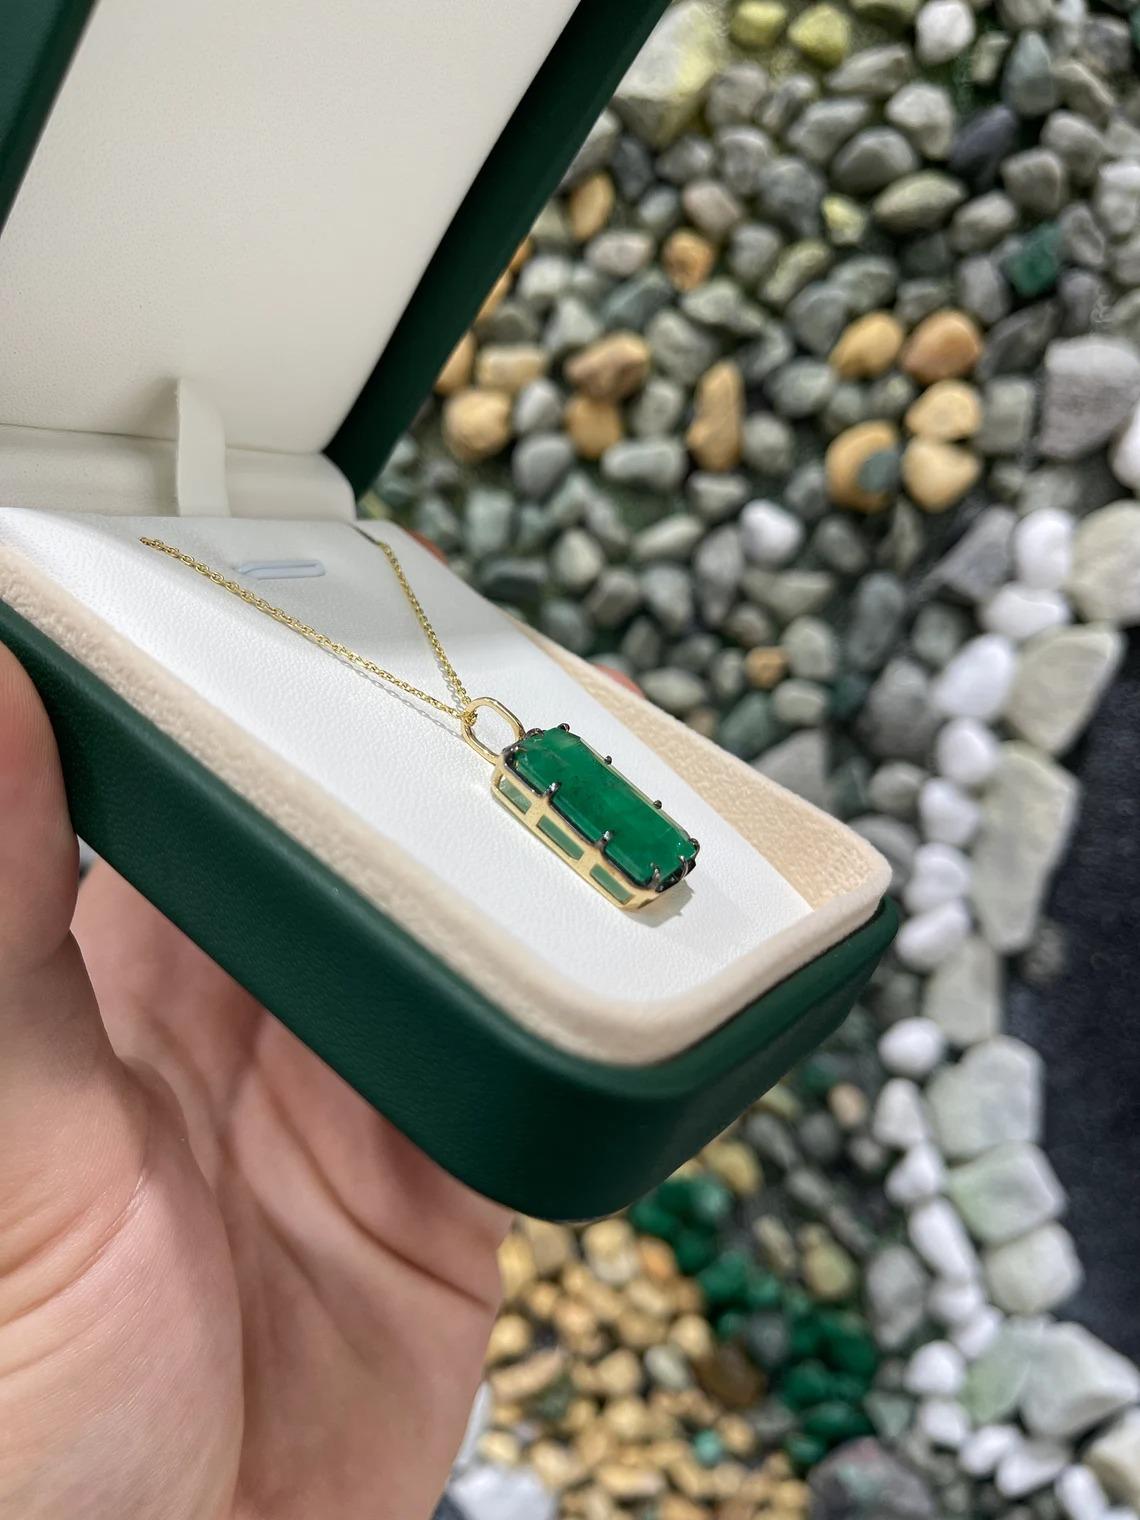 10.98cts 14K Elongated Emerald Cut Emerald Gold Pendant Black Rhodium Prongs In New Condition For Sale In Jupiter, FL